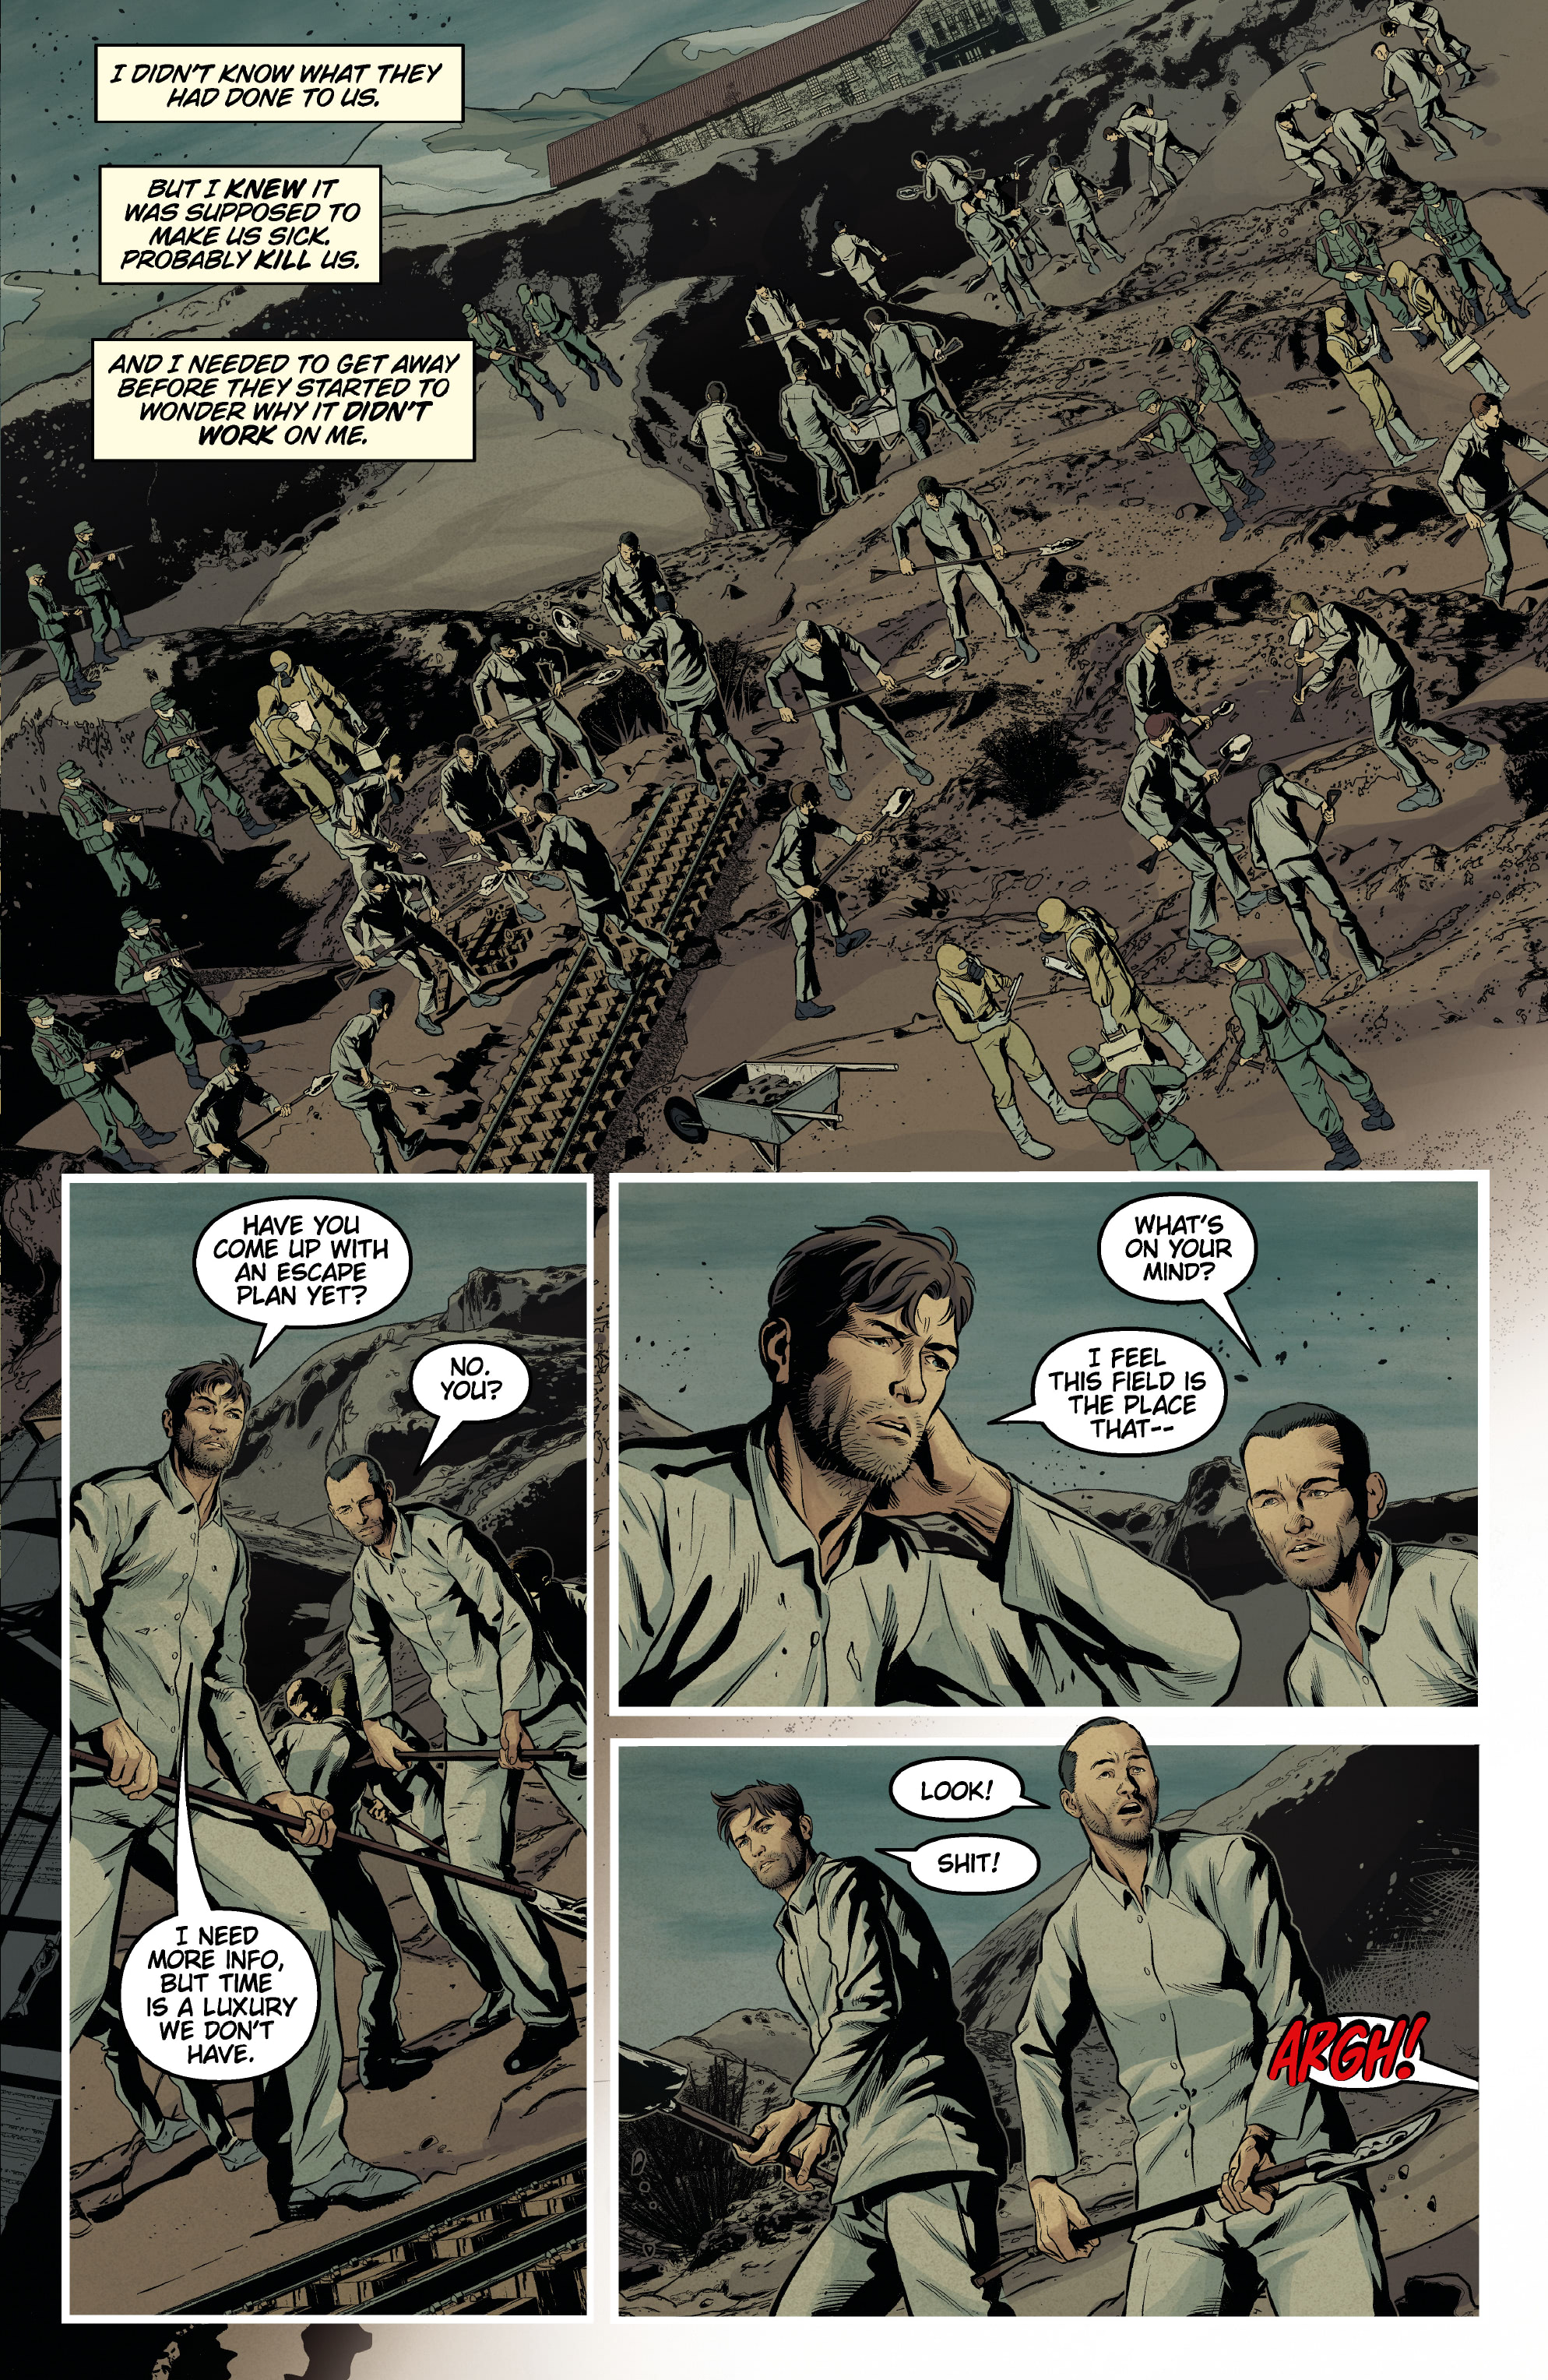 Read online The Collector: Unit 731 comic -  Issue #2 - 9